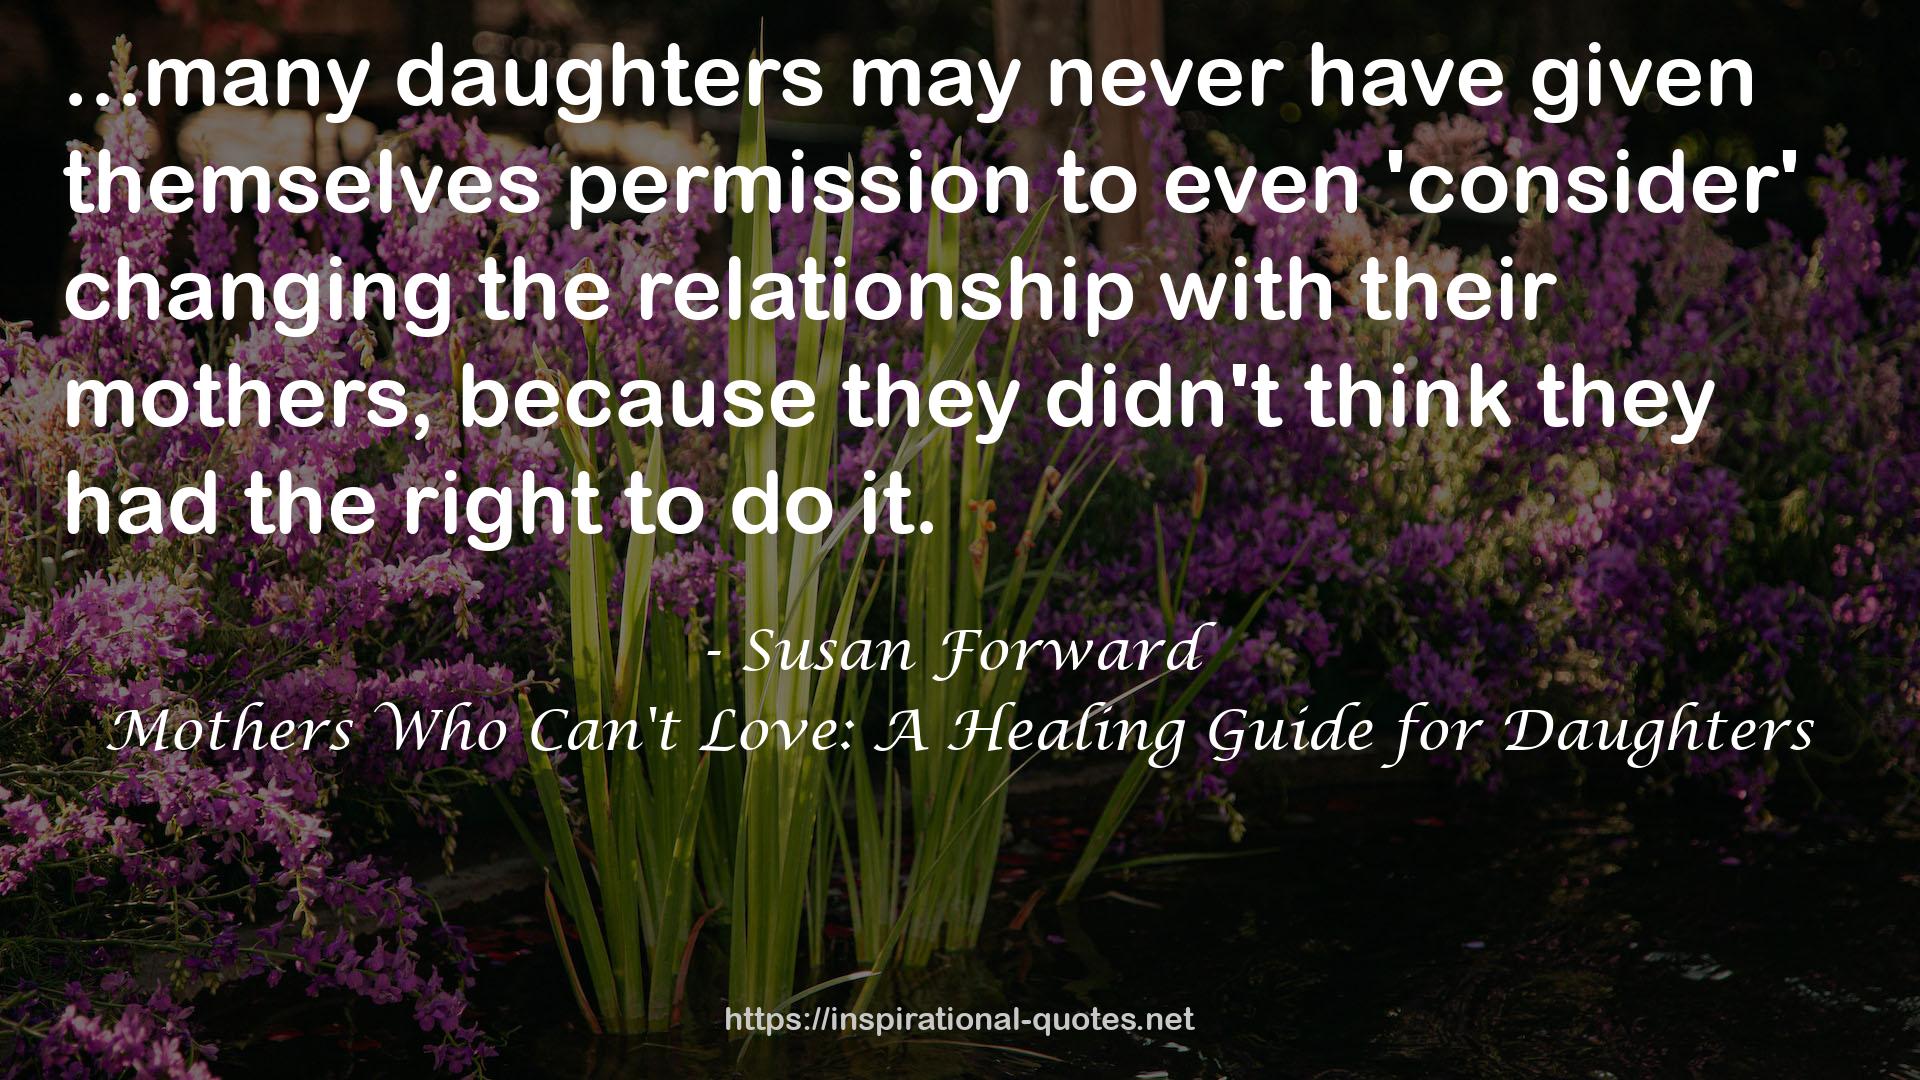 Mothers Who Can't Love: A Healing Guide for Daughters QUOTES